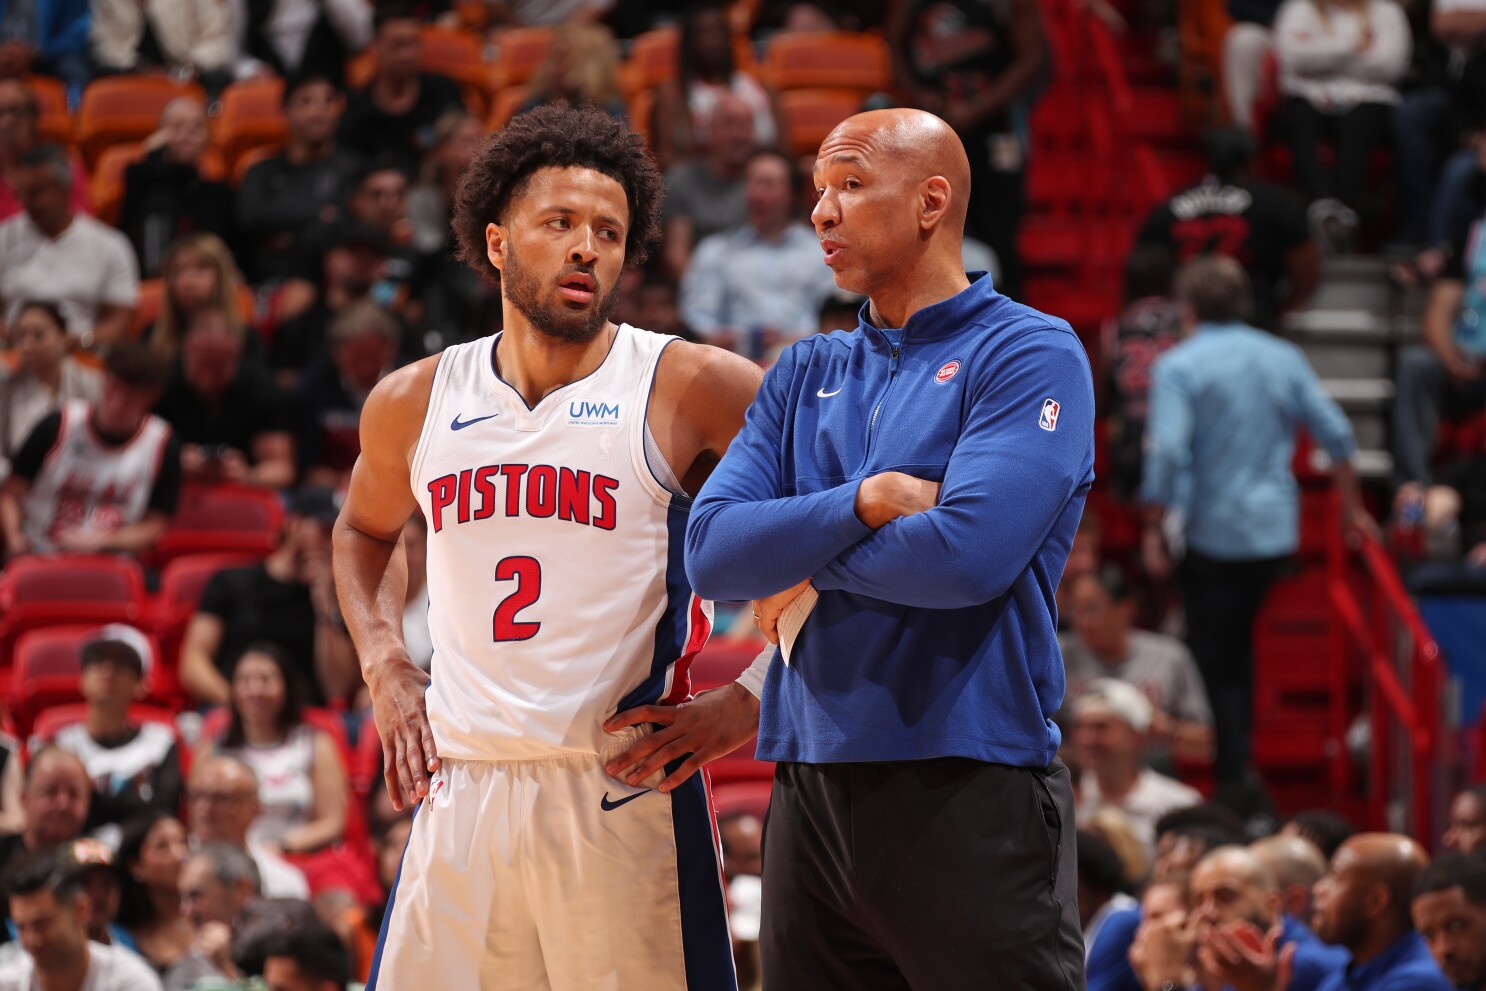 Detroit Pistons May Change Coaches: What's Next for Monty Williams and the Team?